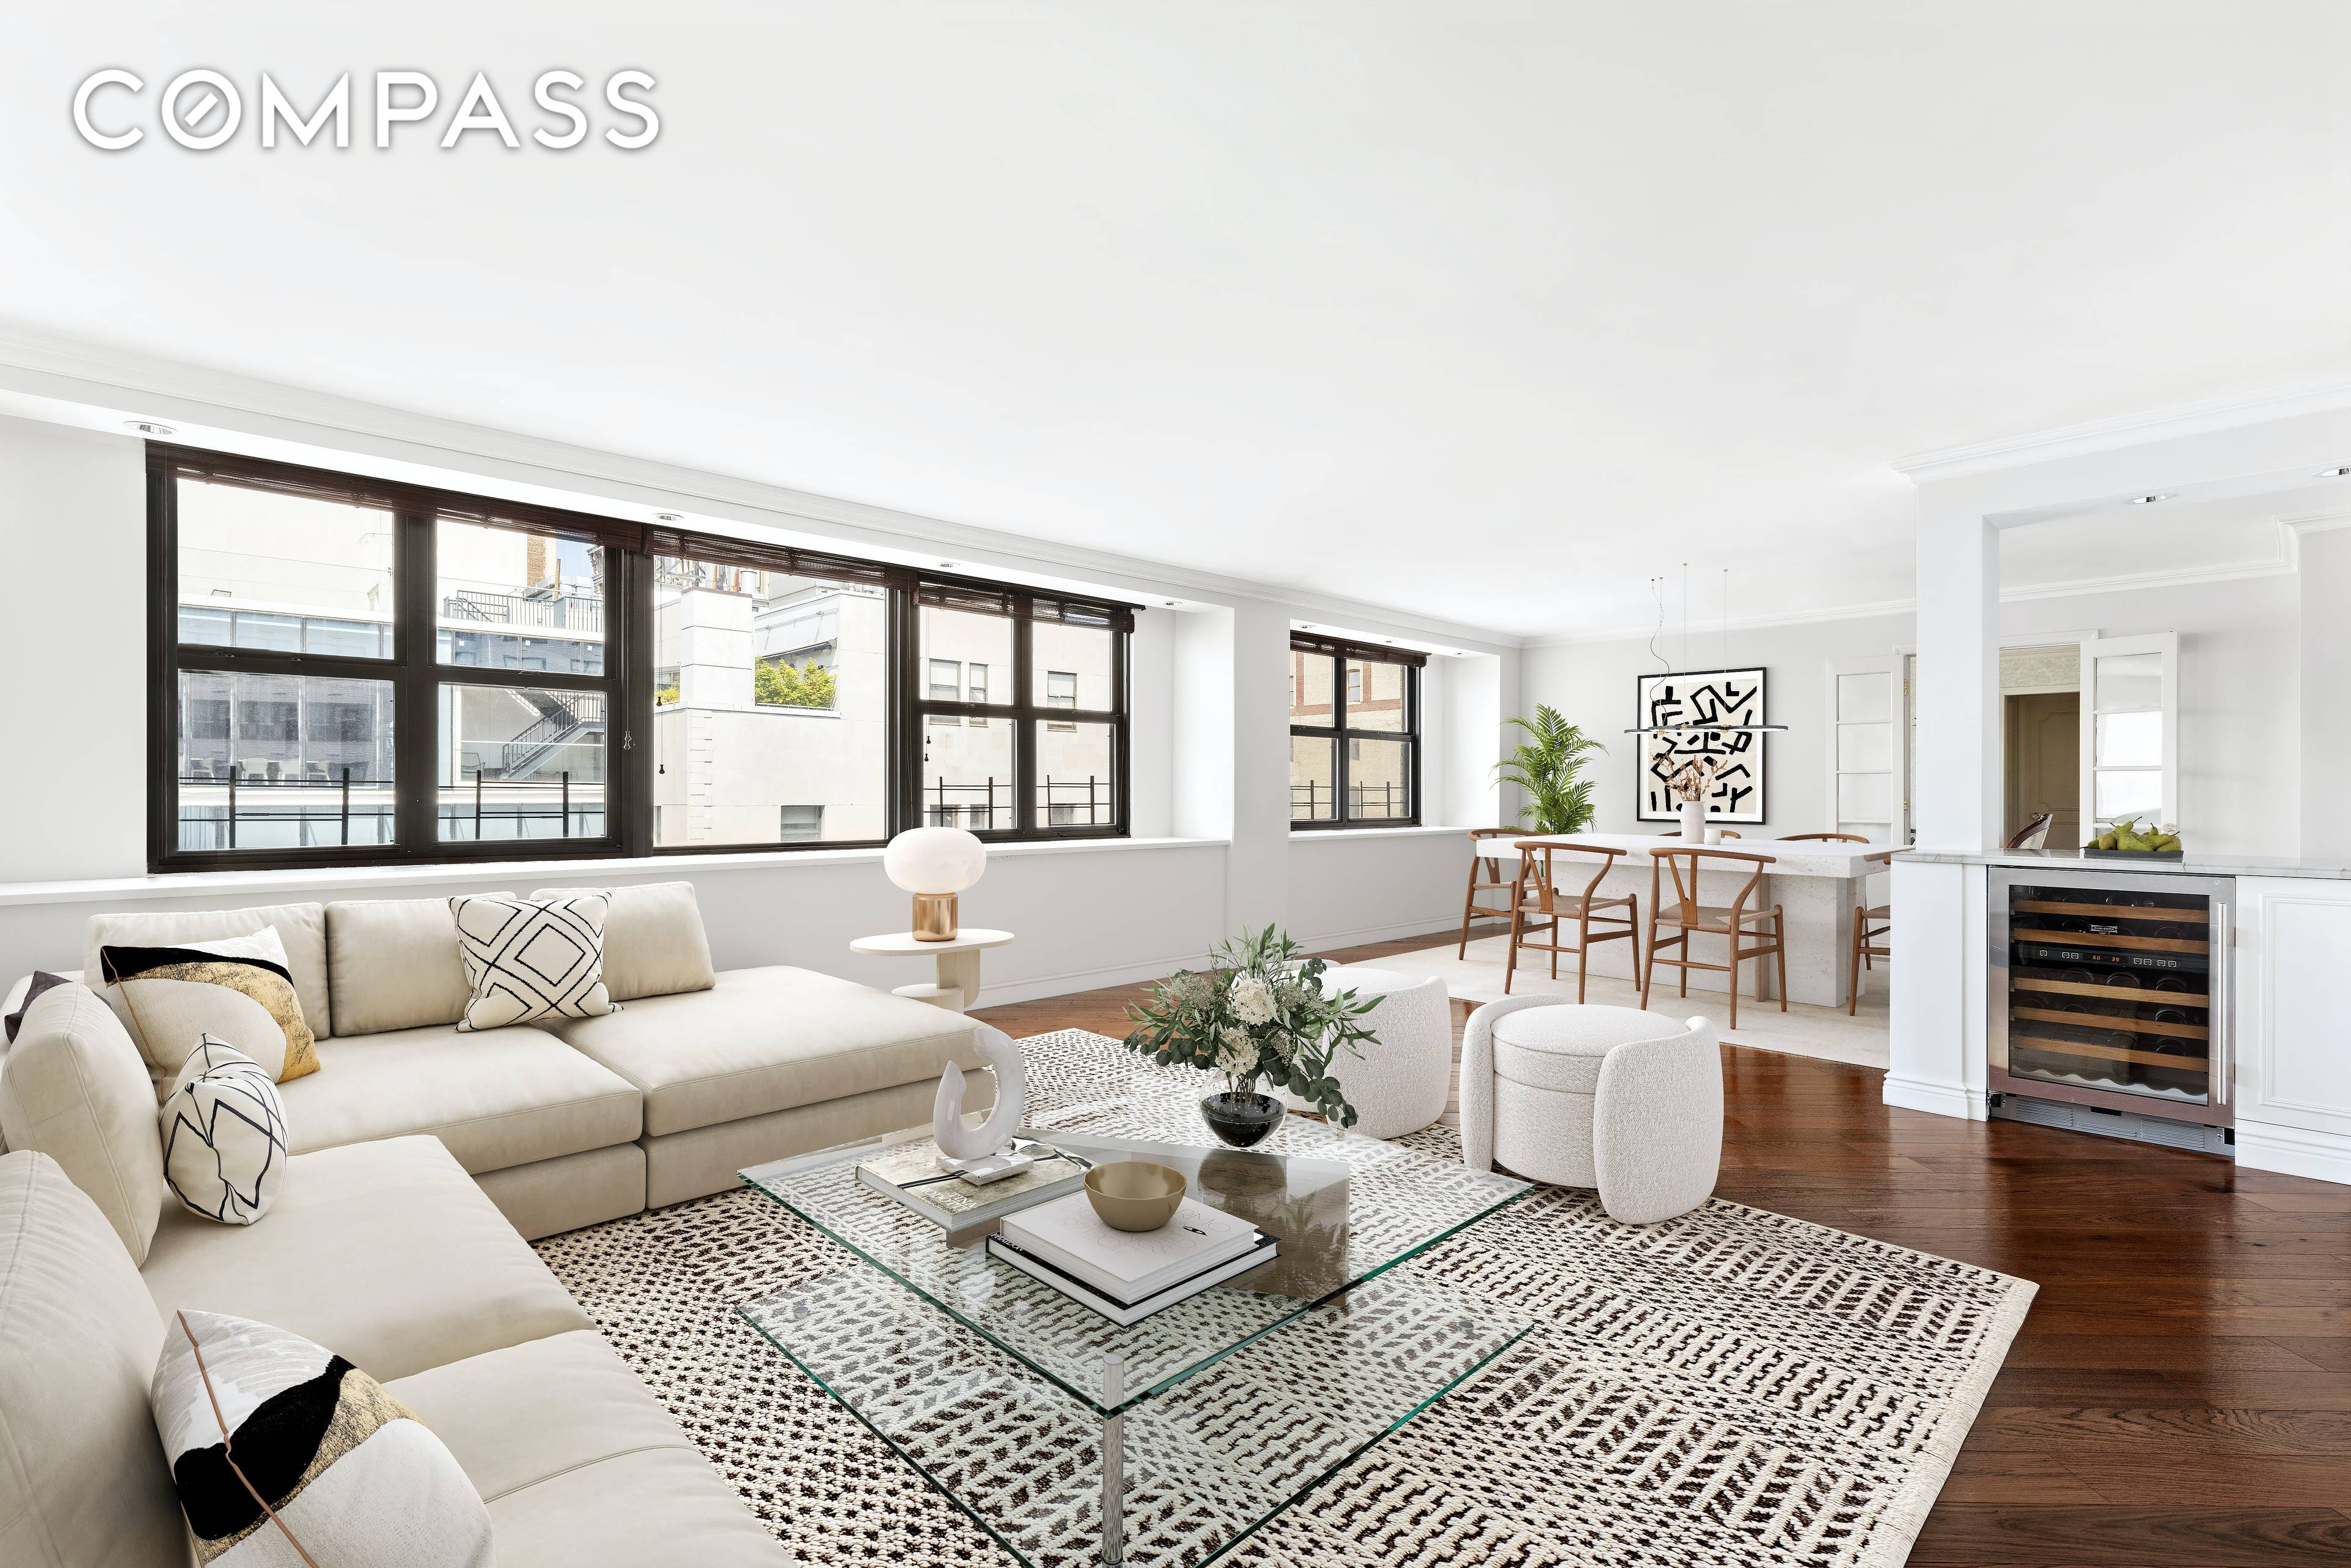 Perfectly perched on a high floor equidistant between Gramercy Park and Union Square, this large combination apartment offers outstanding interior and exterior space, views, light, and convenience, all housed in ...